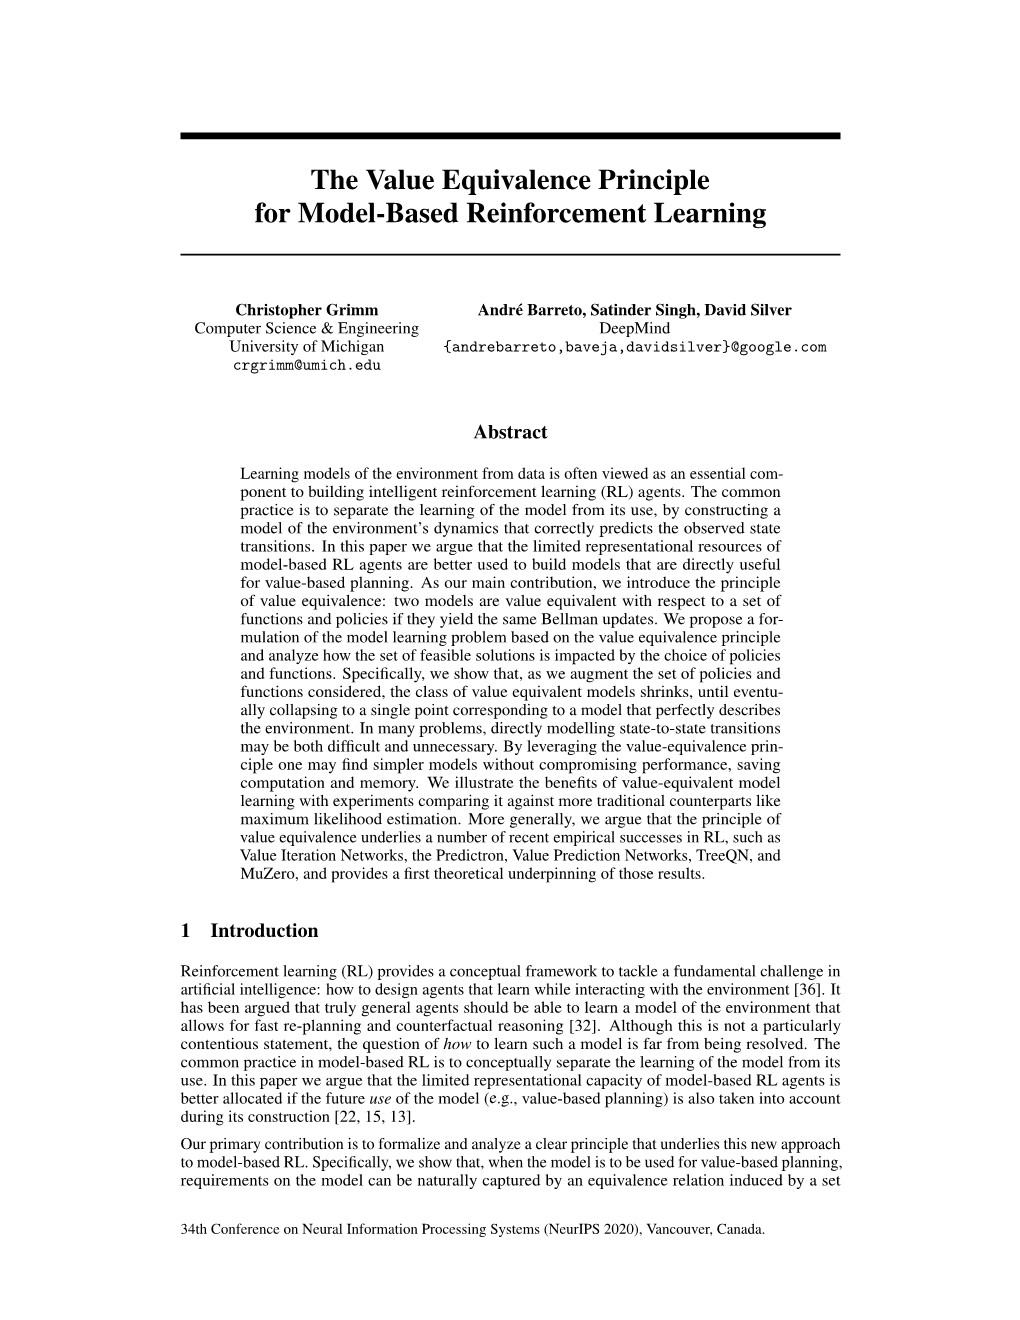 The Value Equivalence Principle for Model-Based Reinforcement Learning